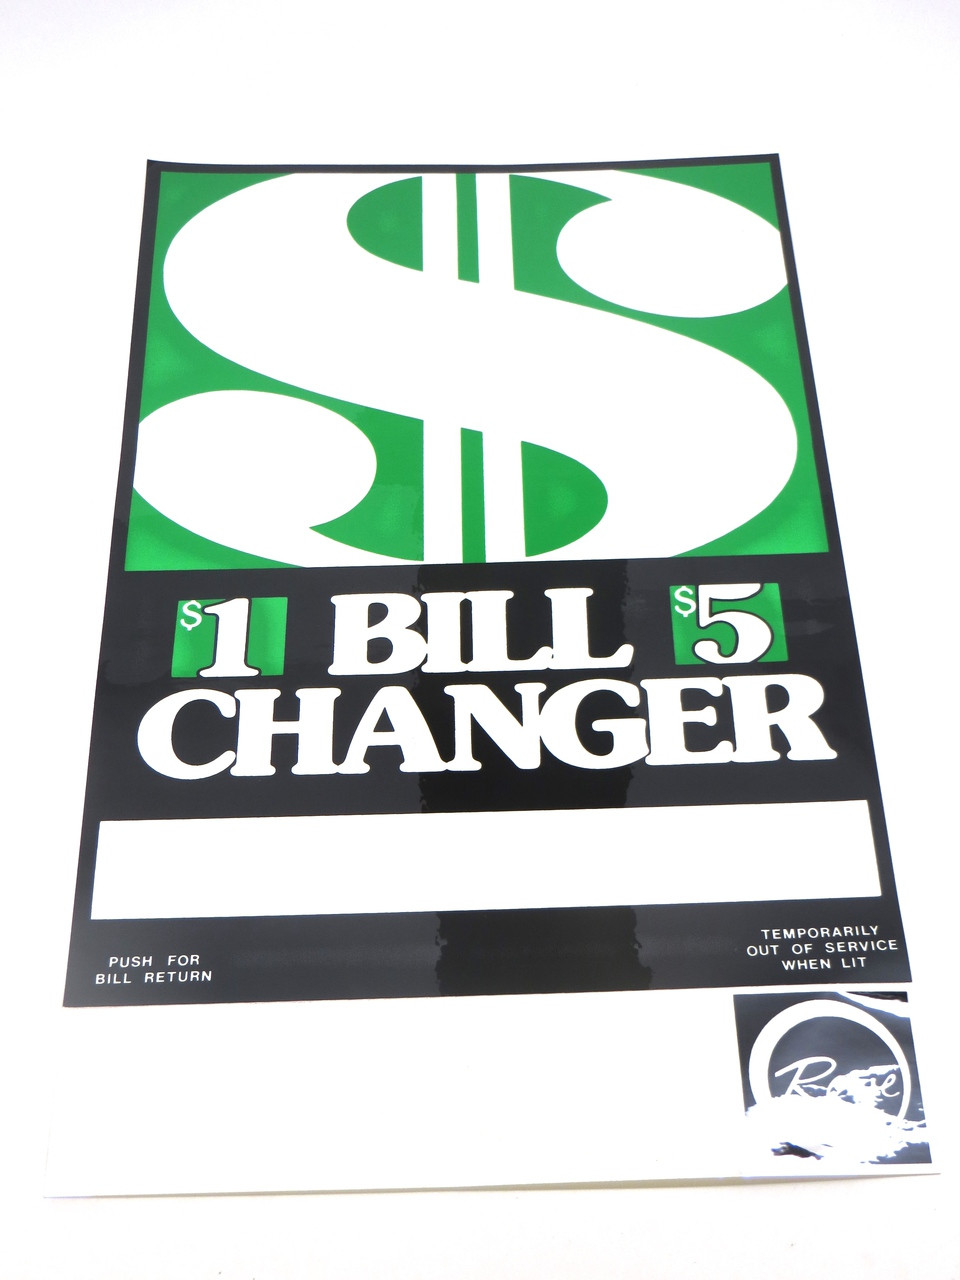 11" x 7" Amercan Standard dollar bill changers Decal label for Rowe